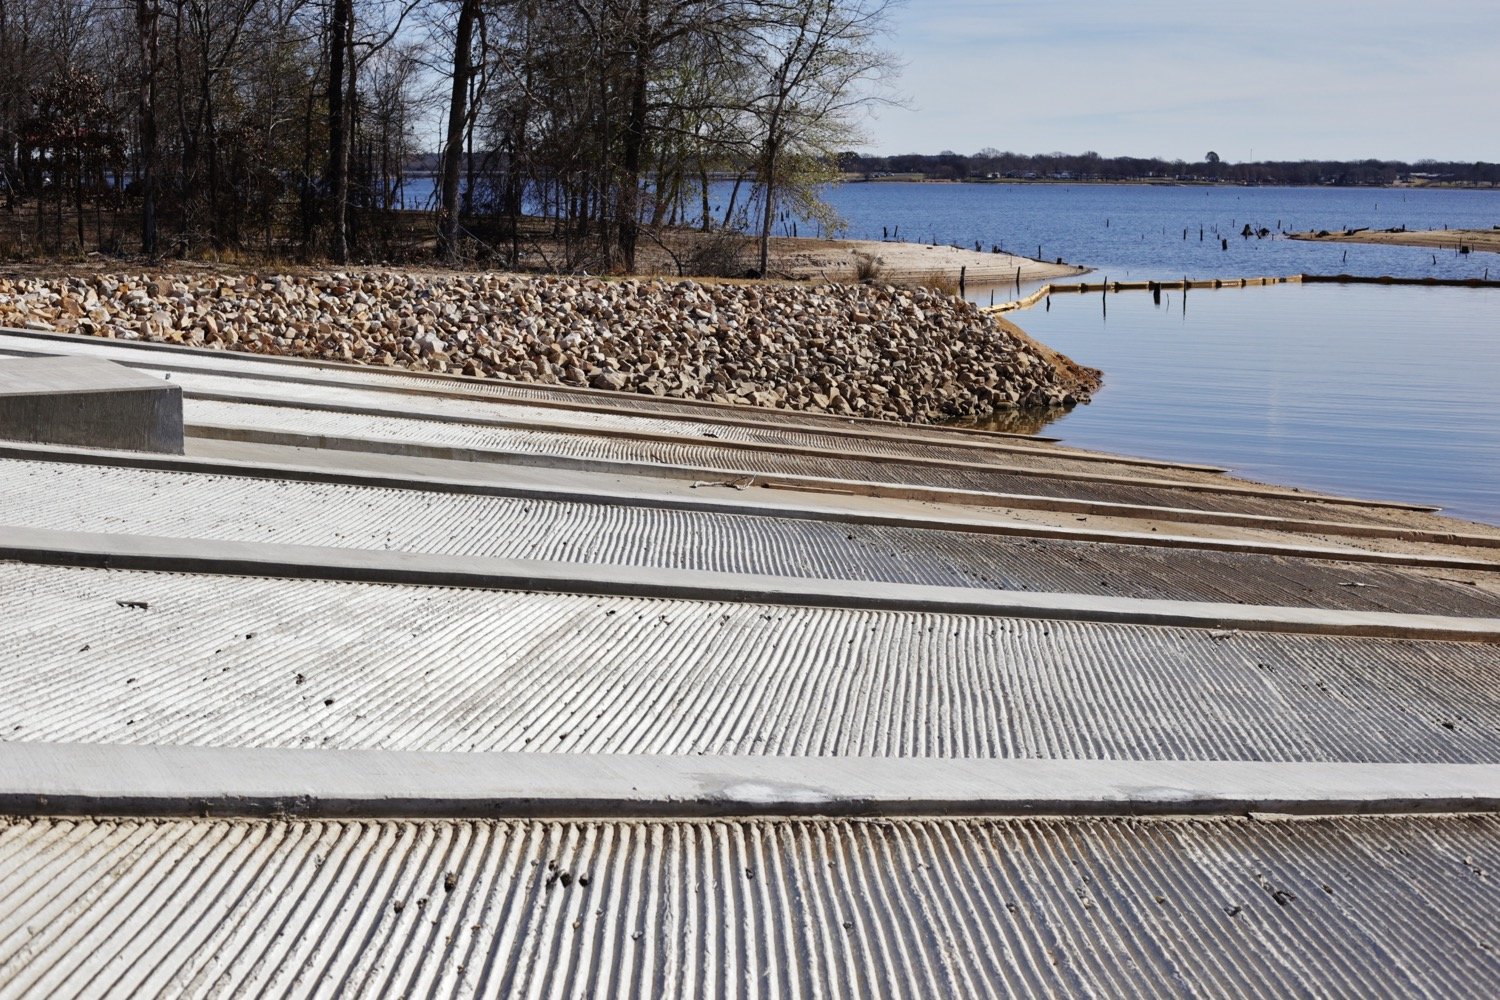 The six-lane concrete boat ramps are complete and being readied for service.